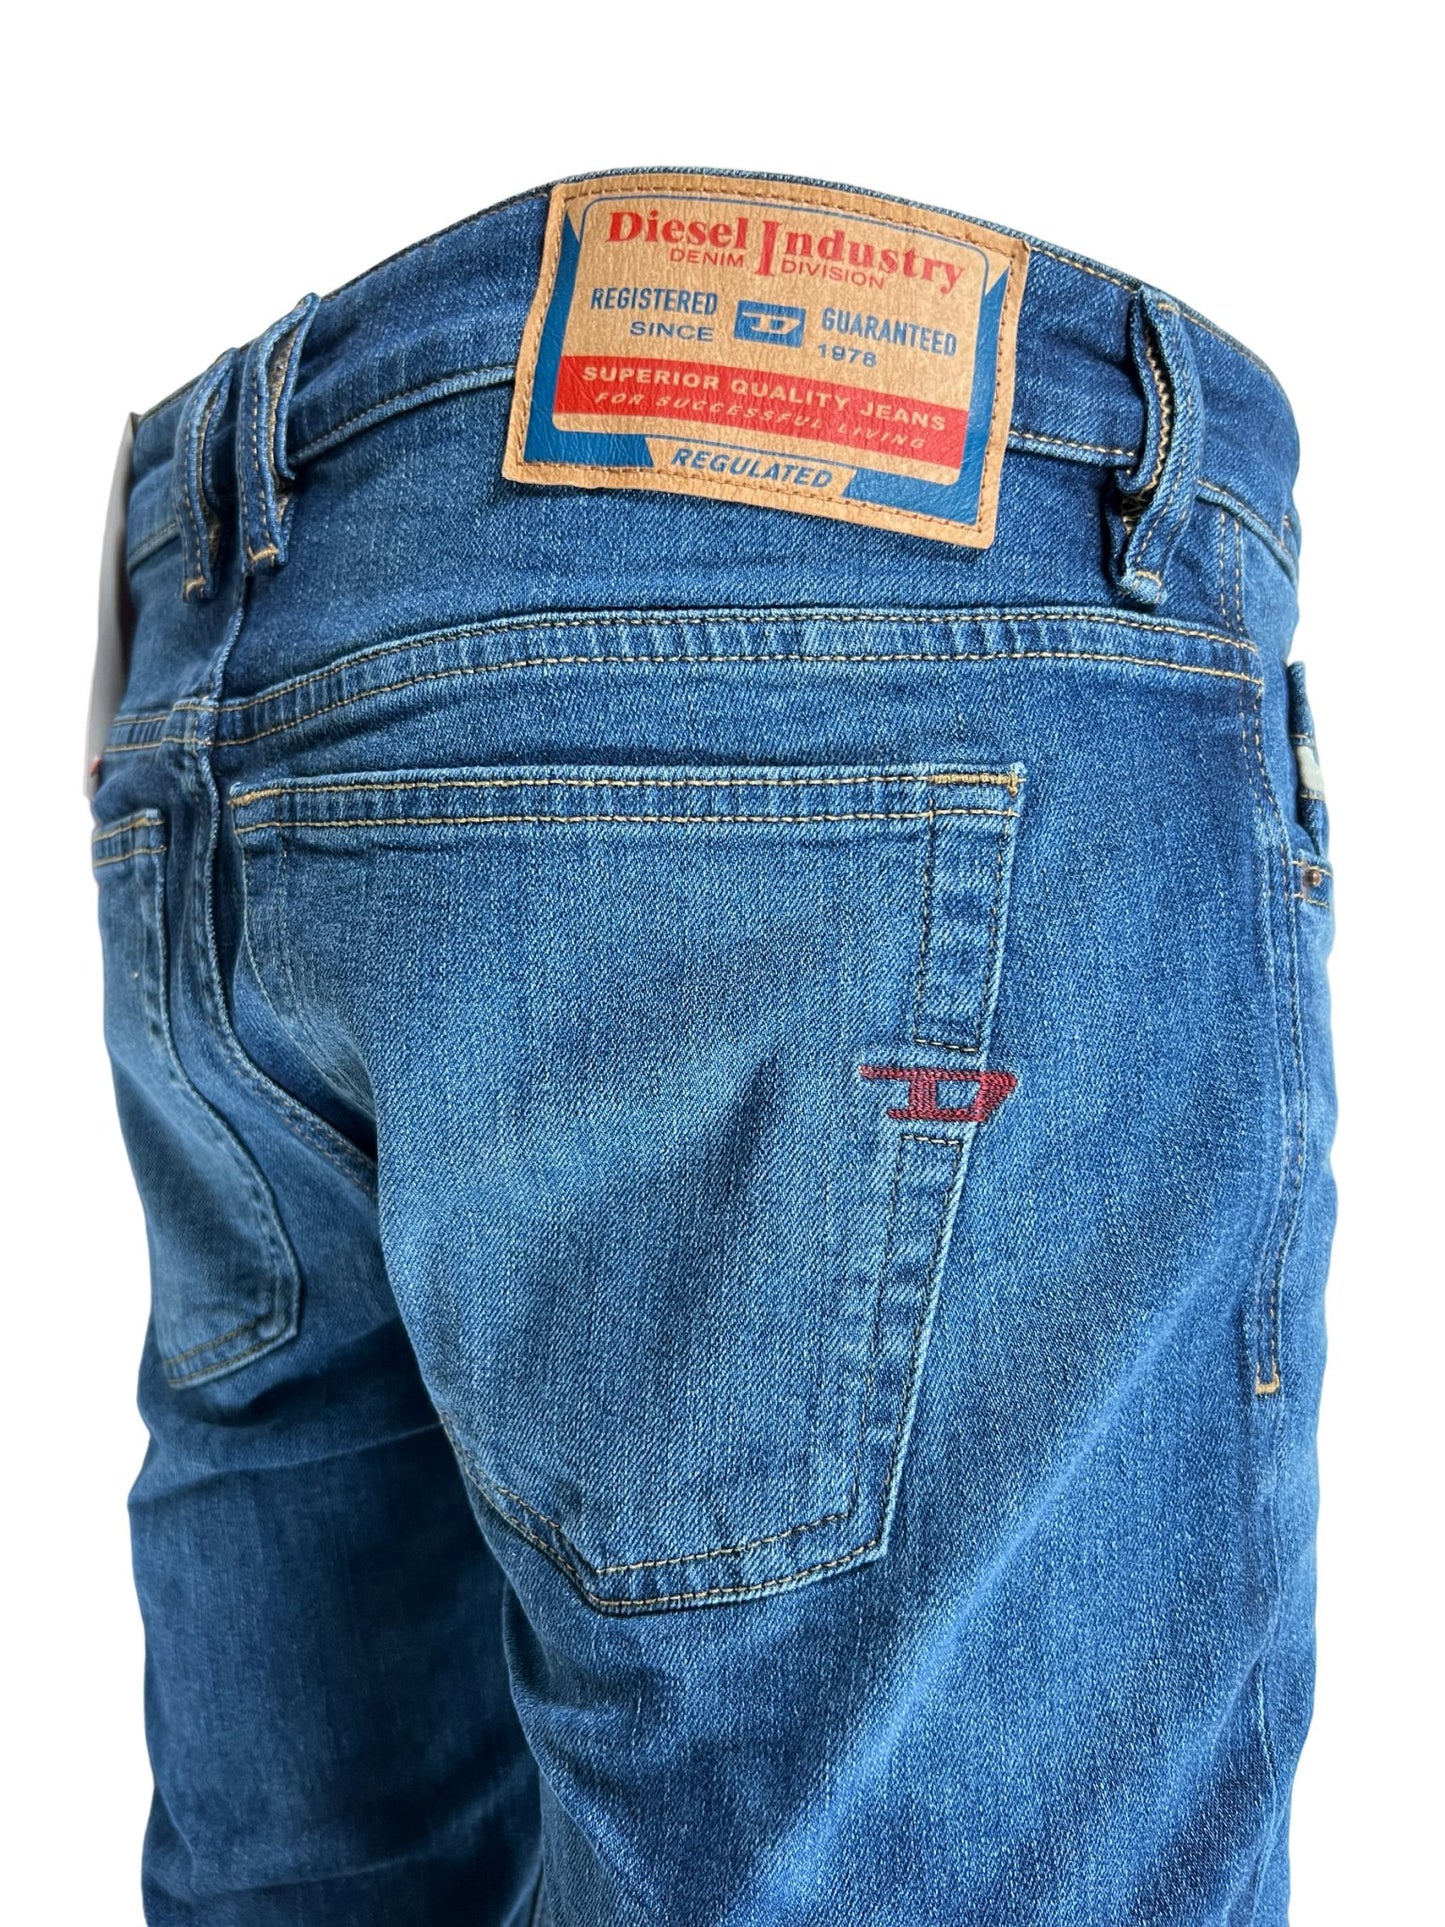 A pair of DIESEL skinny style blue jeans with a label on the back.